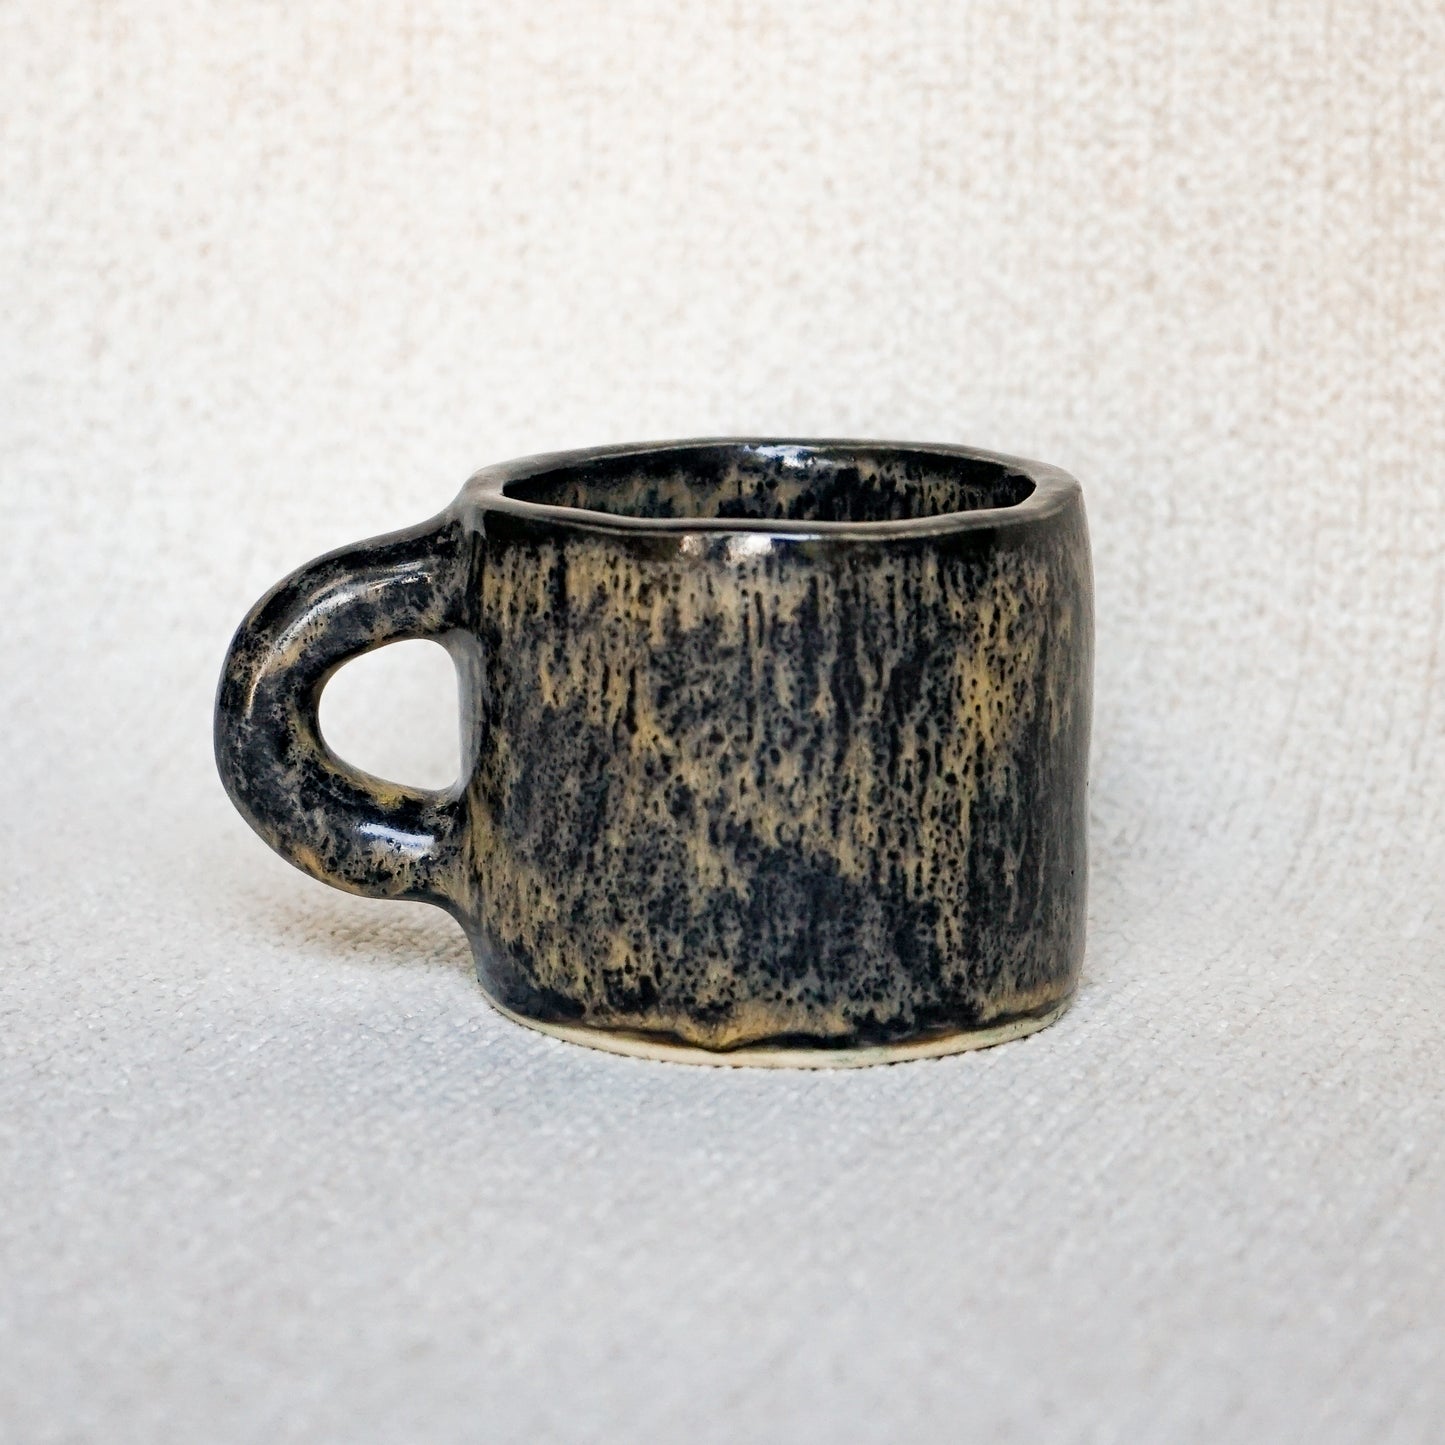 The Brown + Black Mug- Available in 2 sizes